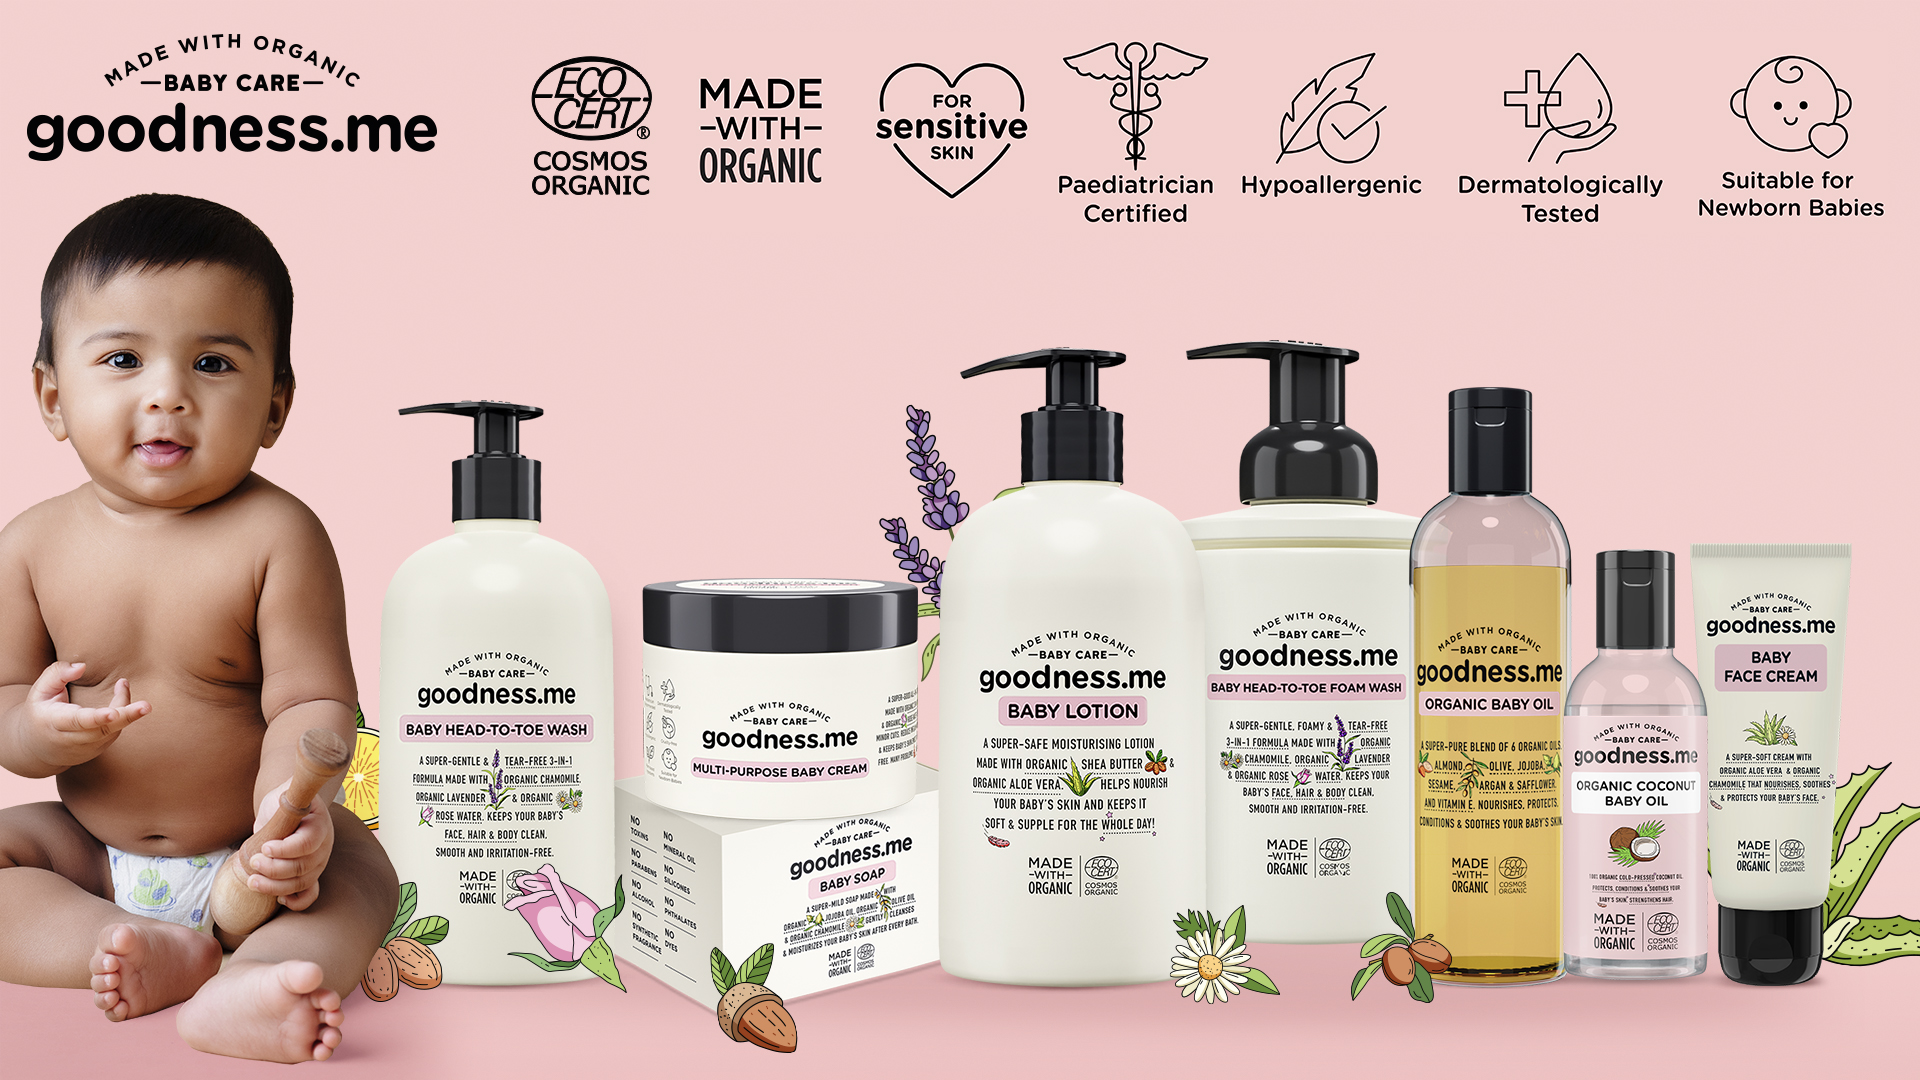 move-over-natural-choosecertified-organic-products-for-your-babies-with-goodnessmeorganic-certified-pure-and-zero-toxin-products